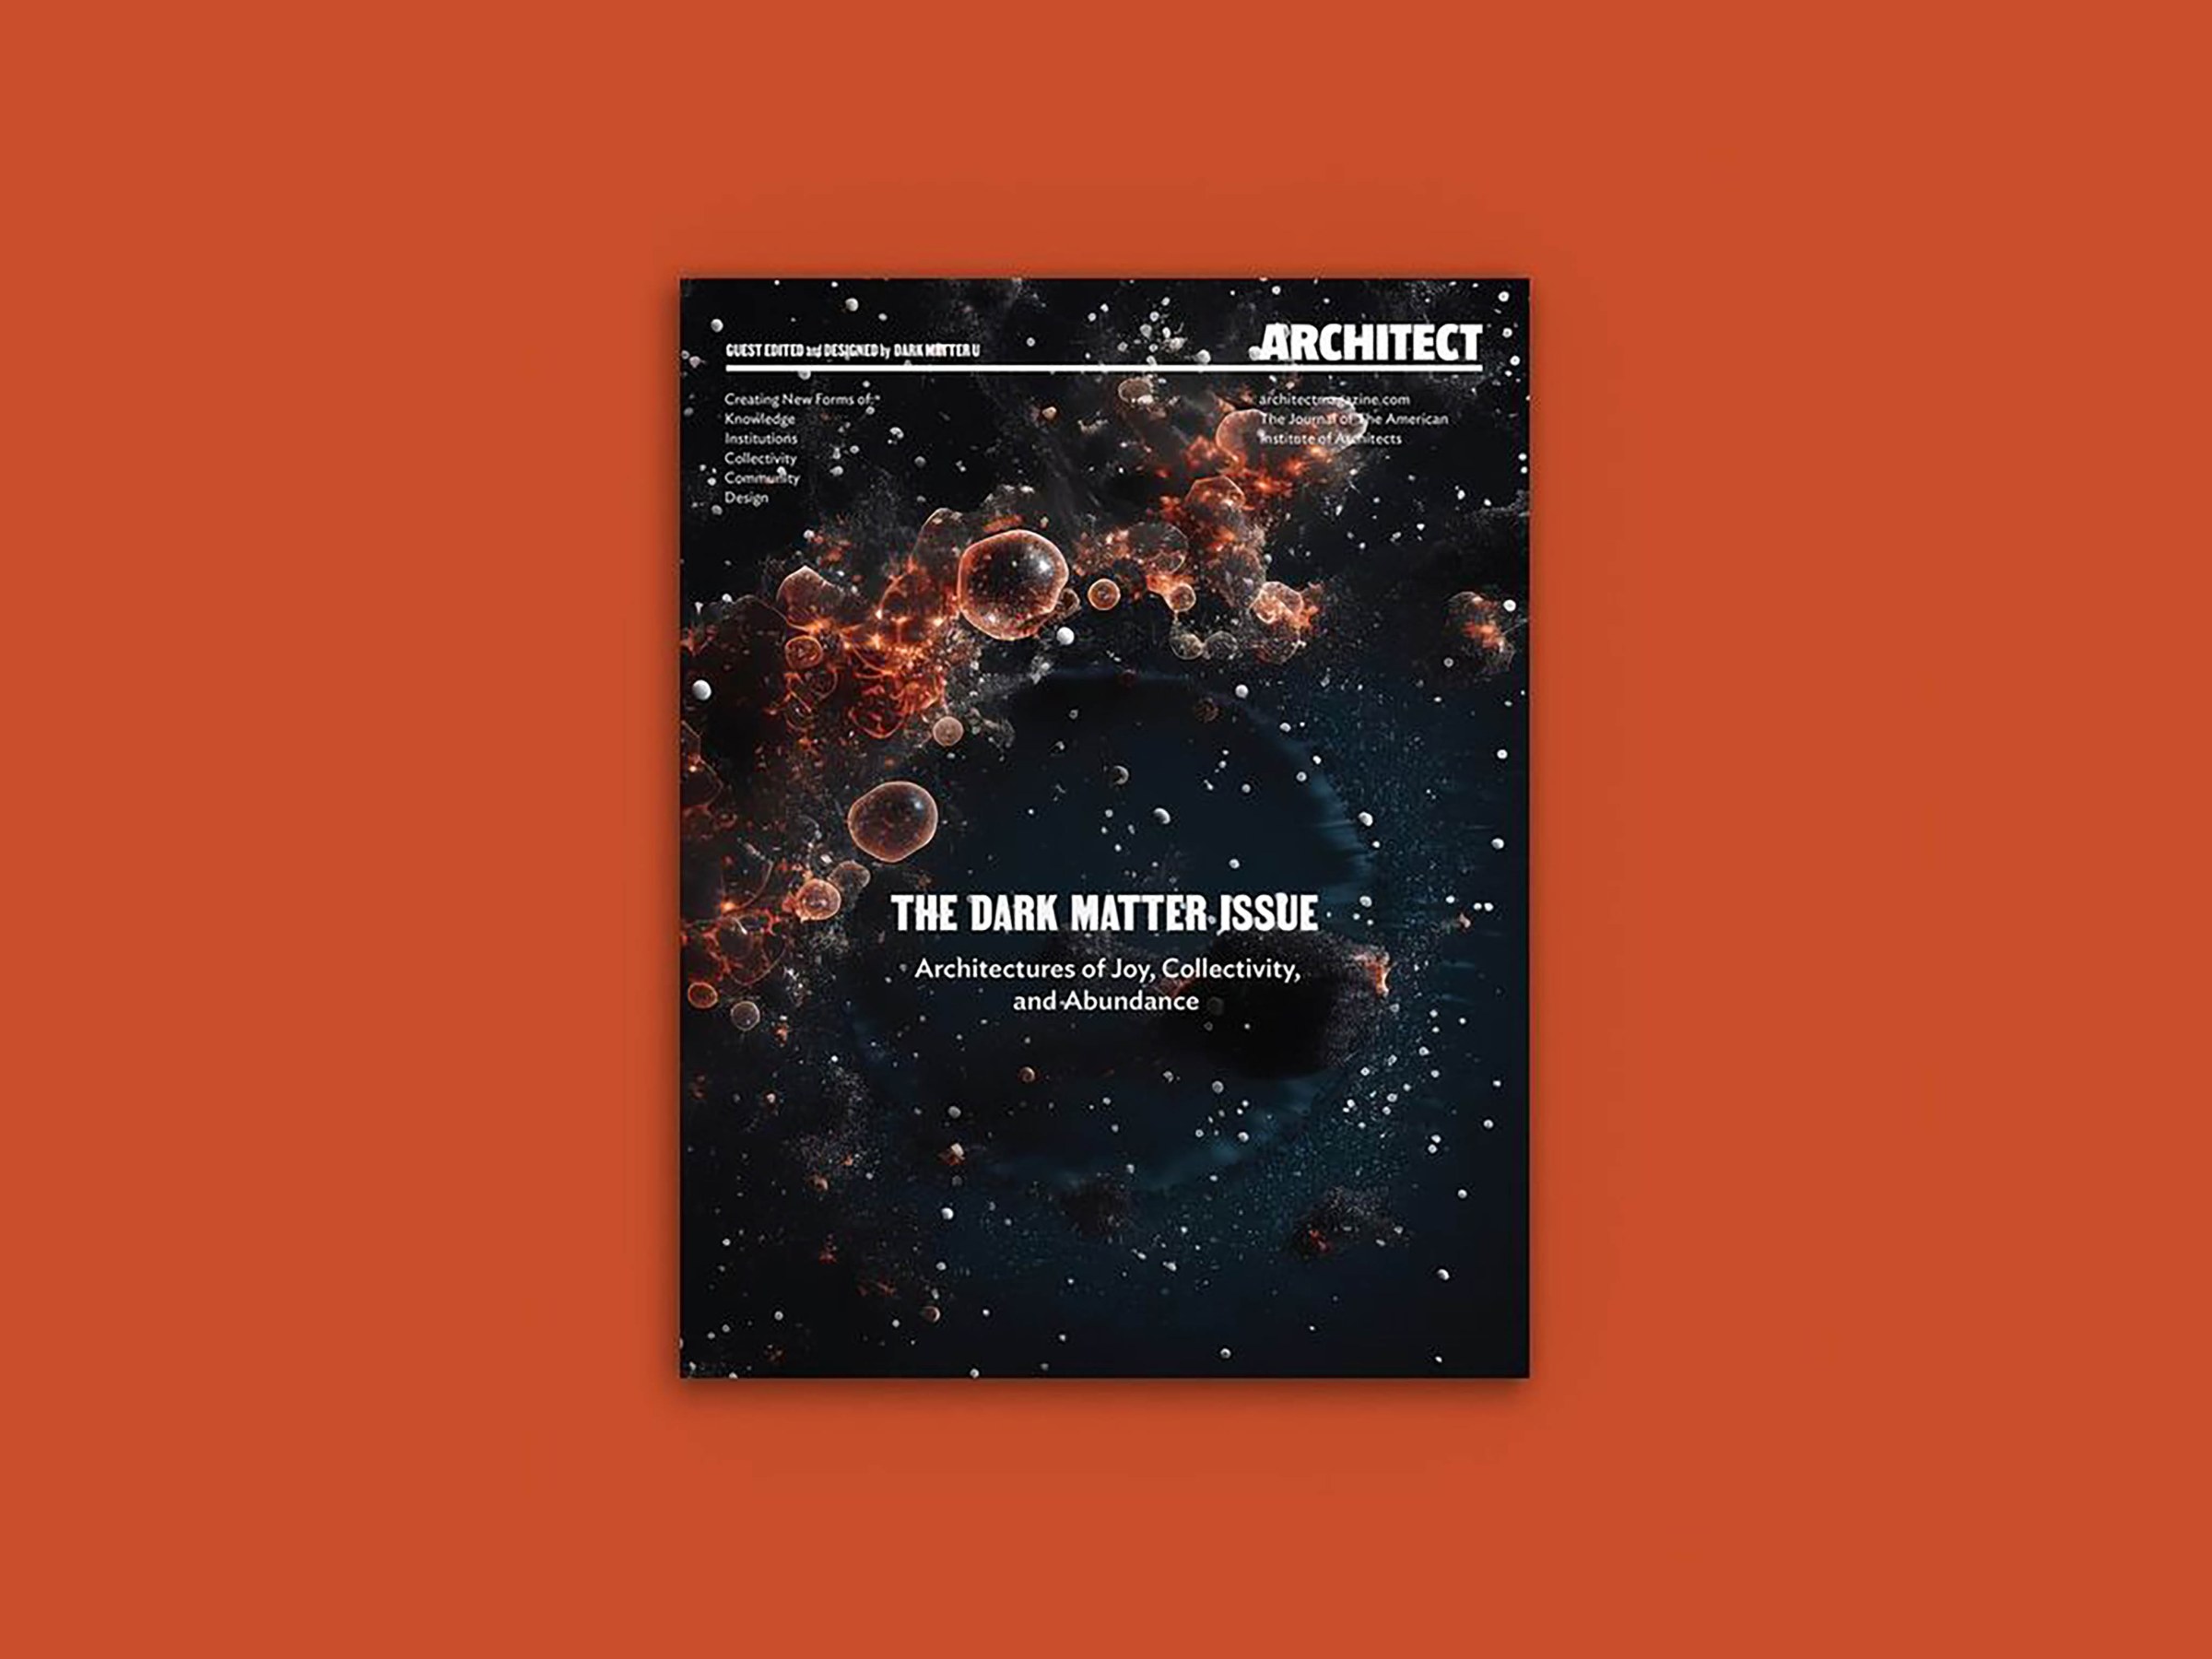 Cover of Dark Matter Issue of Architect Magazine on red background